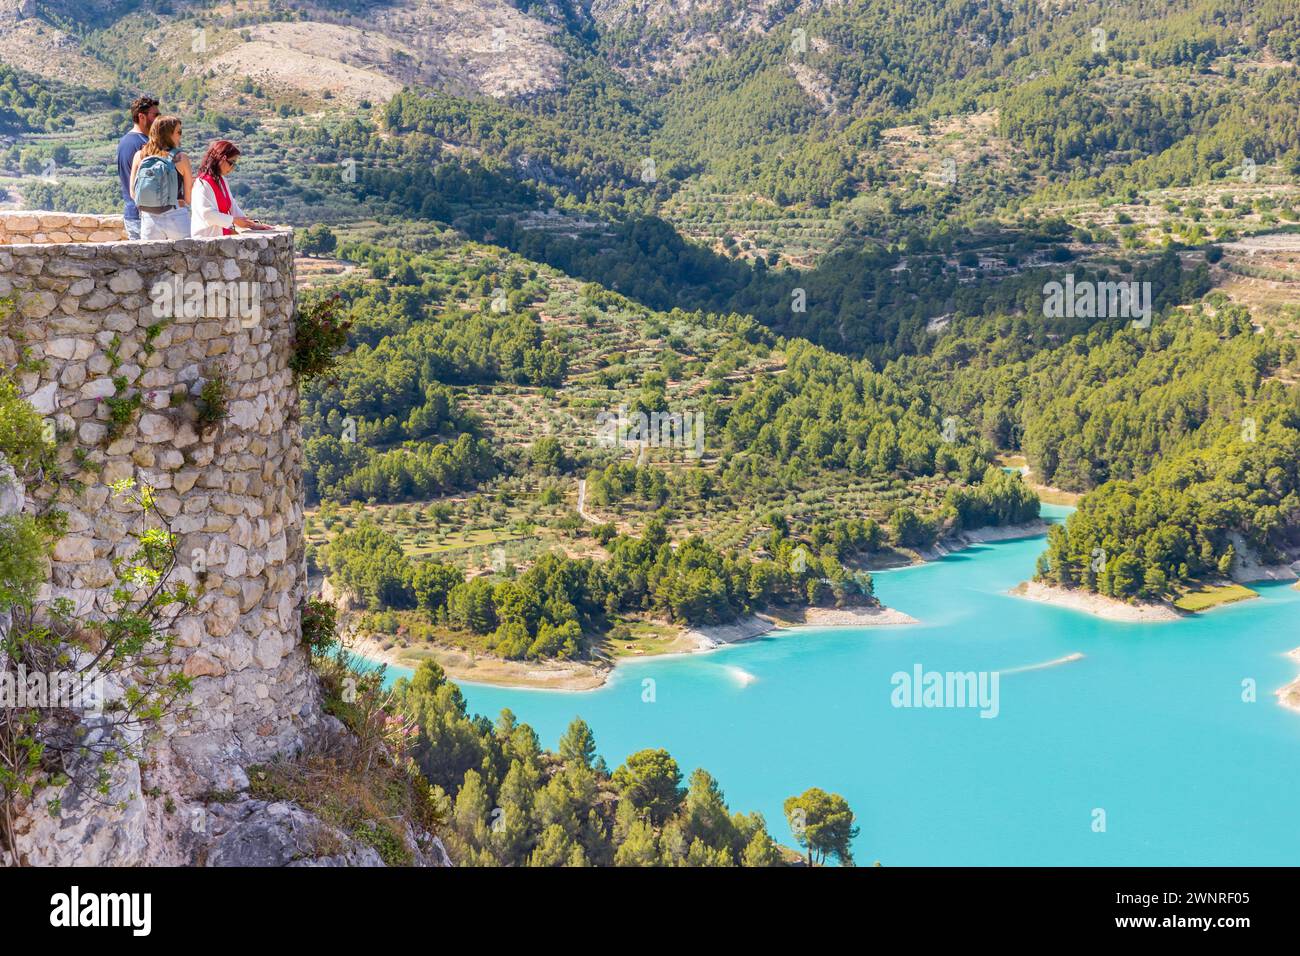 People enjoying the view over the turquoise lake of Guadalest, Spain Stock Photo